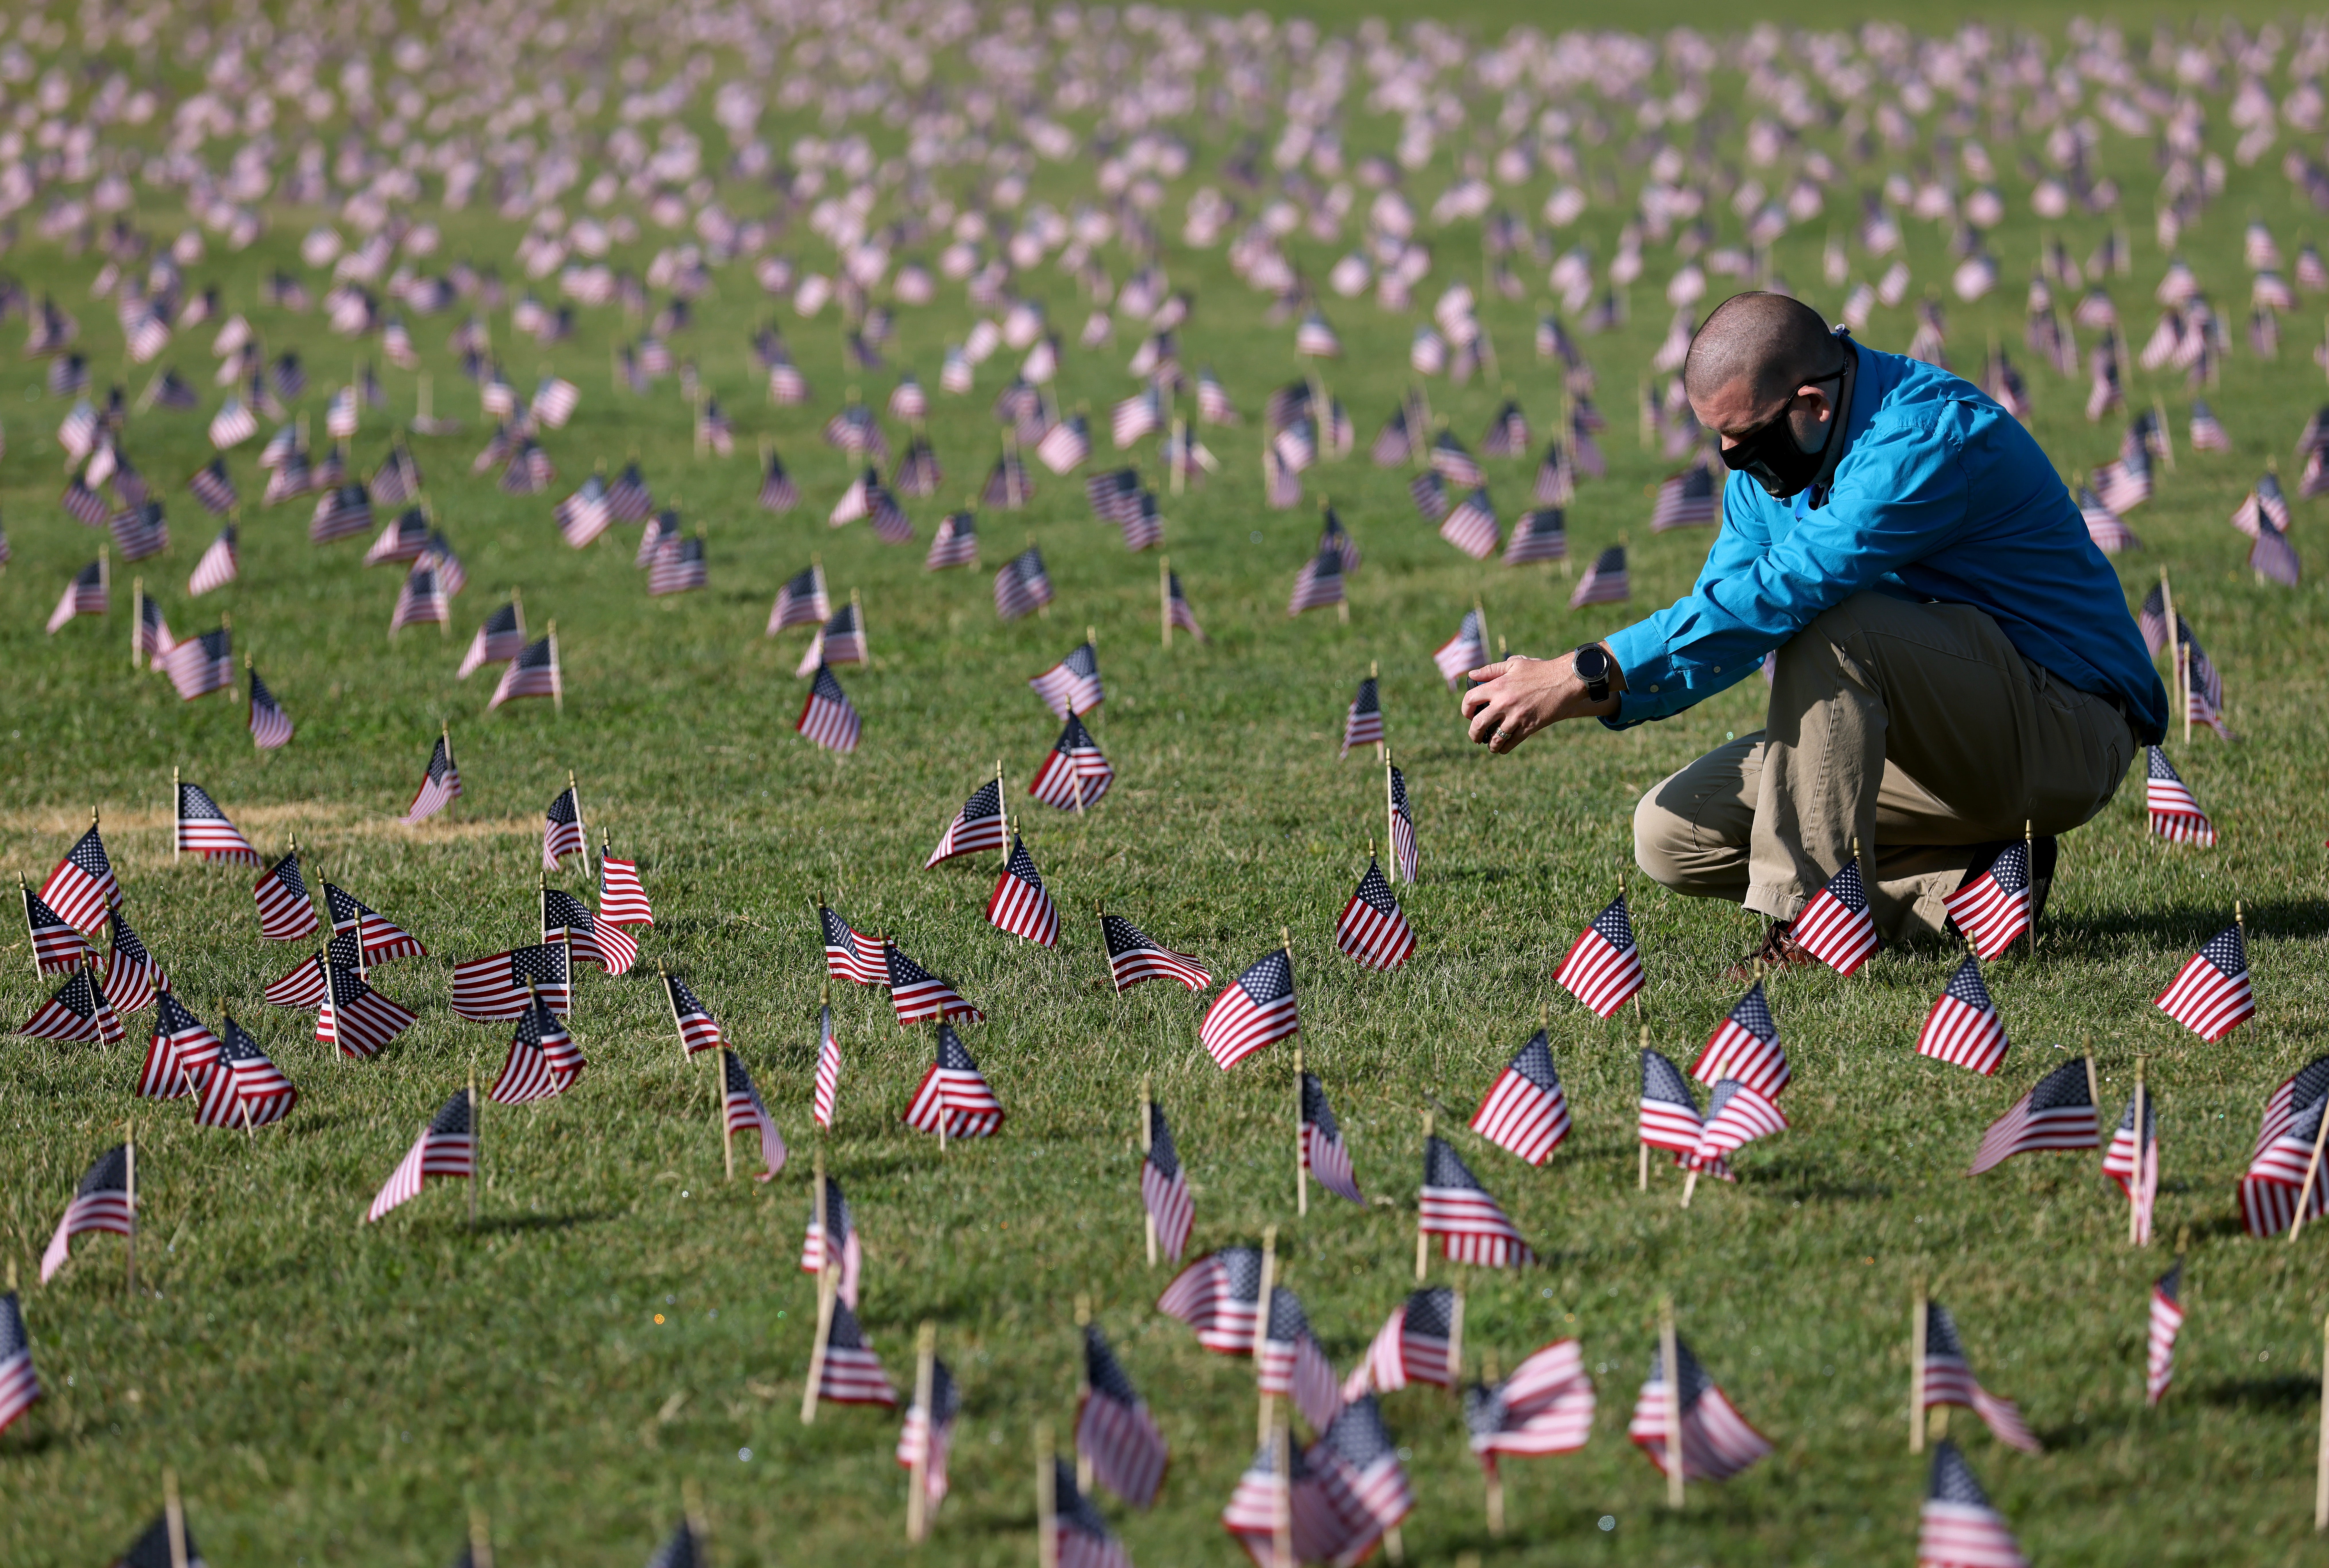 Chris Duncan, whose 75 year old mother Constance died from Covid on her birthday, photographs a Covid Memorial Project installation of 20,000 American flags on the National Mall in Washington, DC